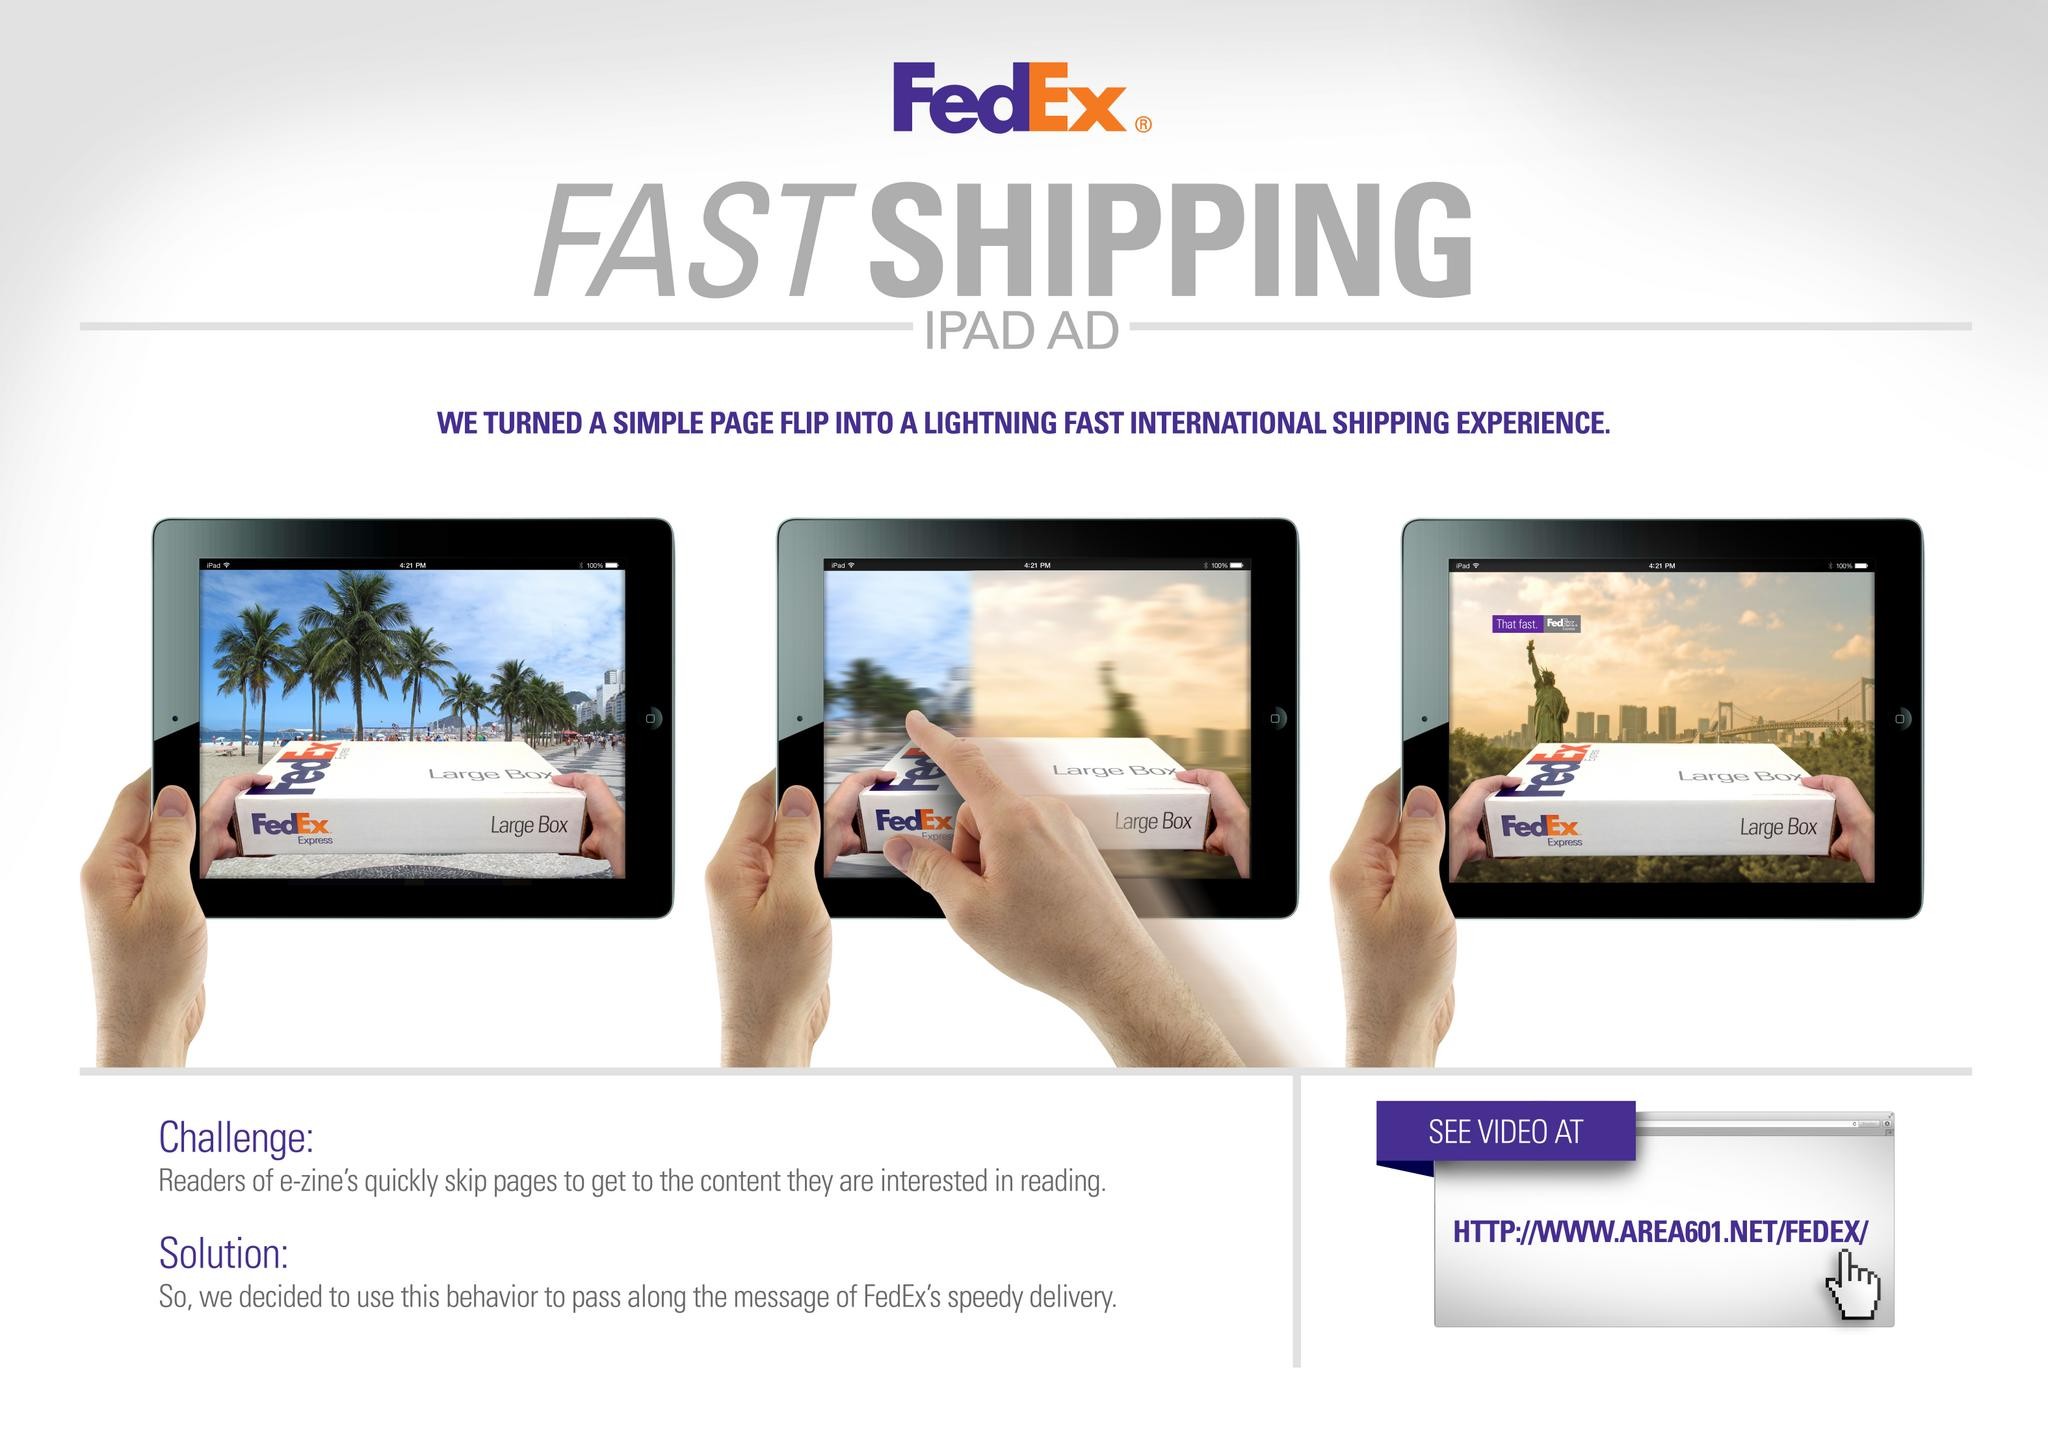 FAST SHIPPING